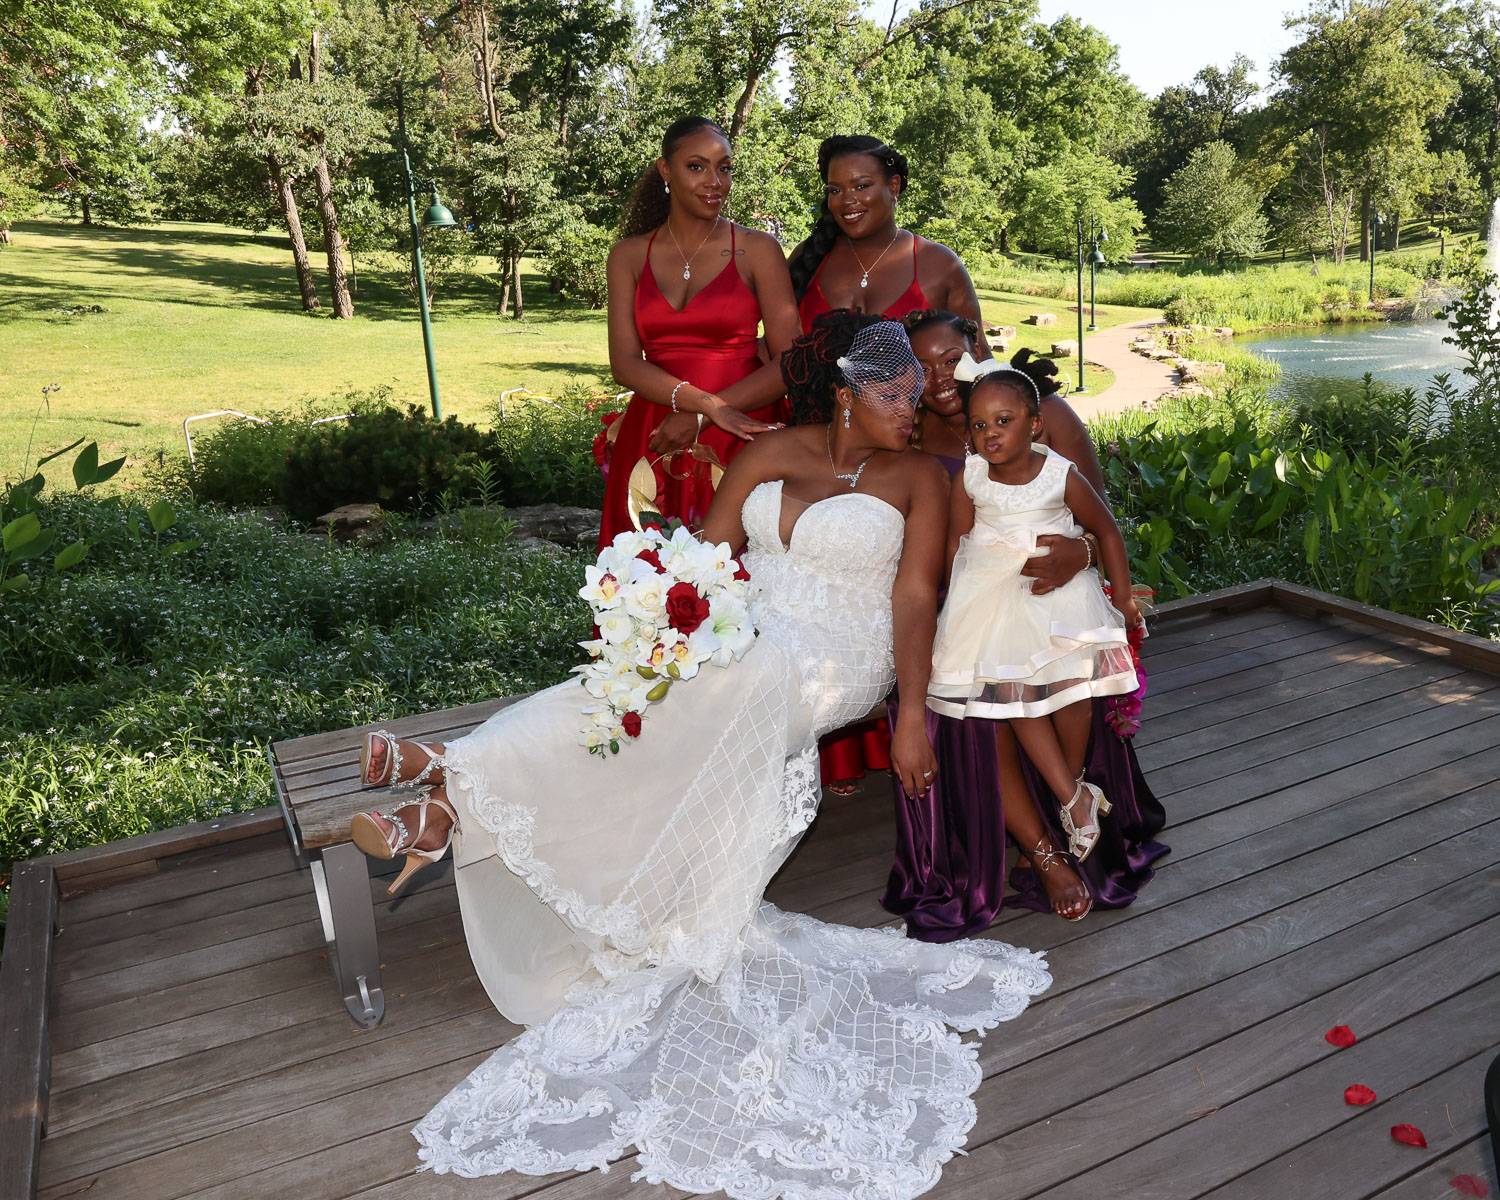 The bride happily sits with her attendants